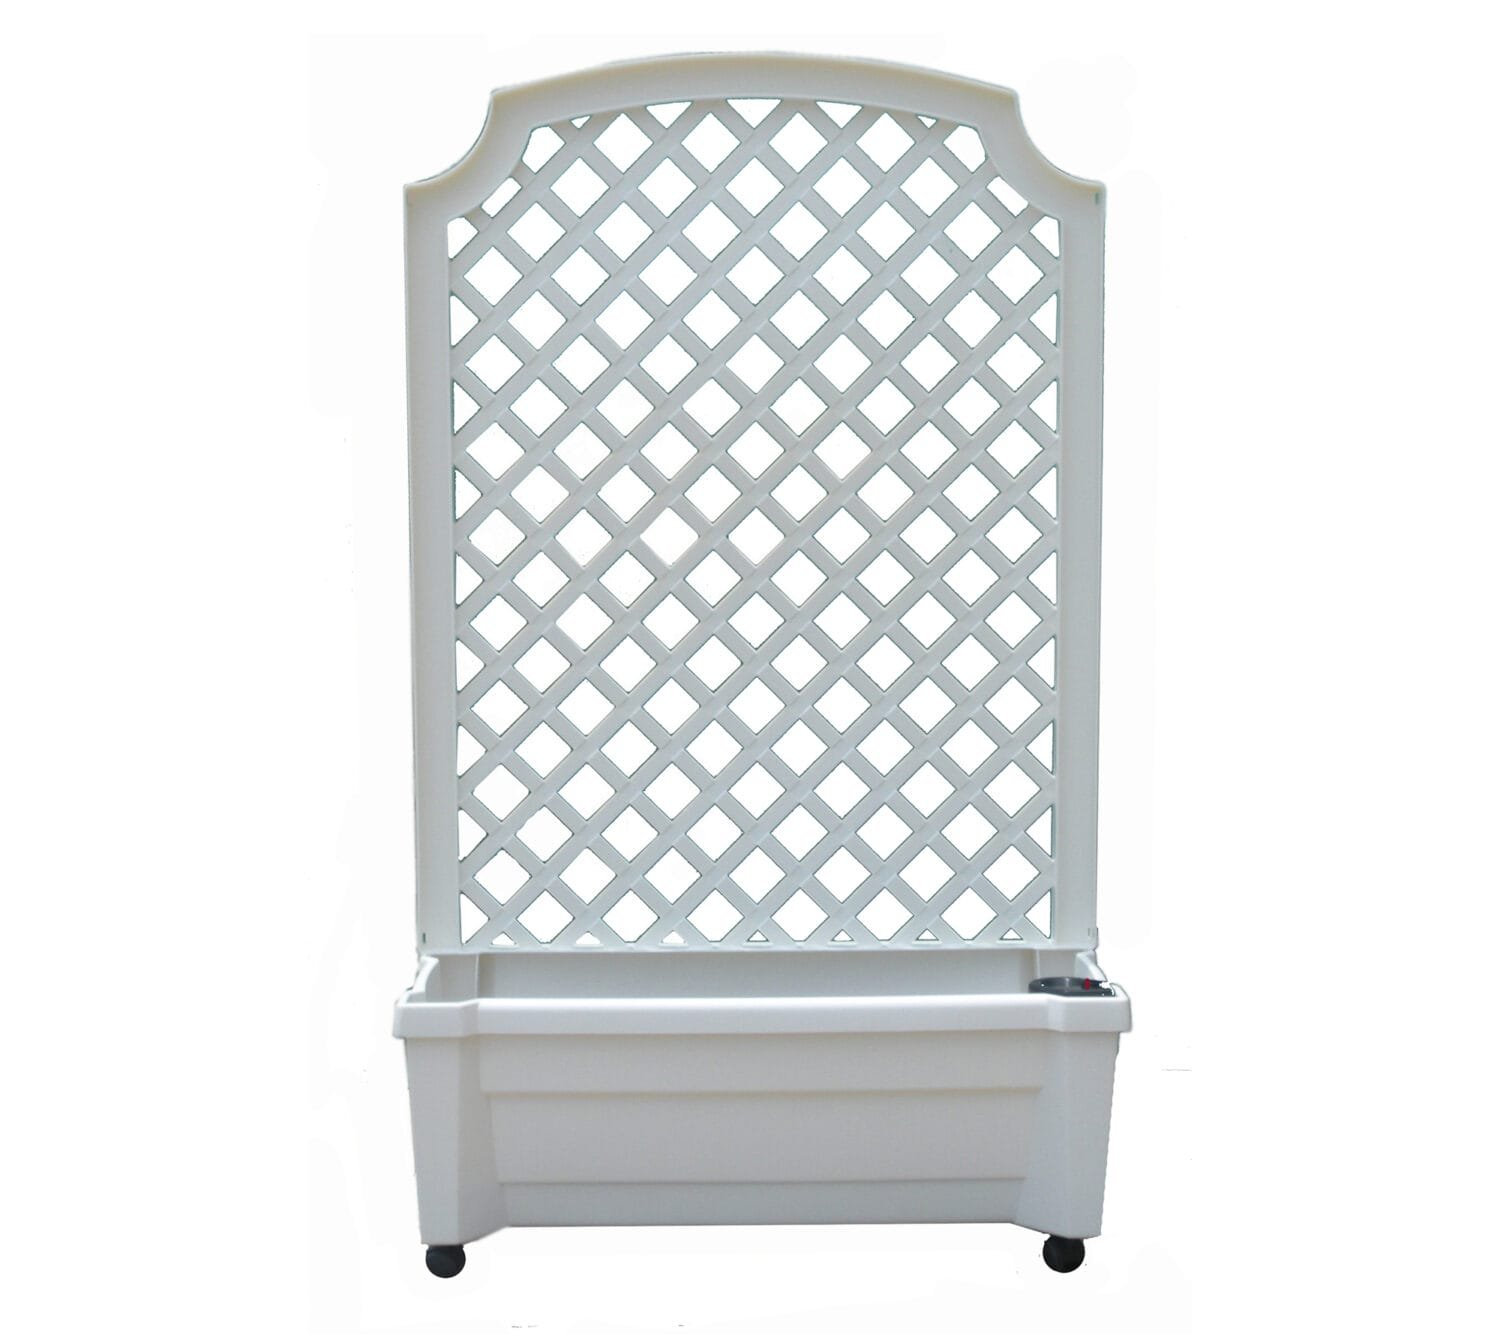 Calypso Planter with Trellis and Water Reservoirer5